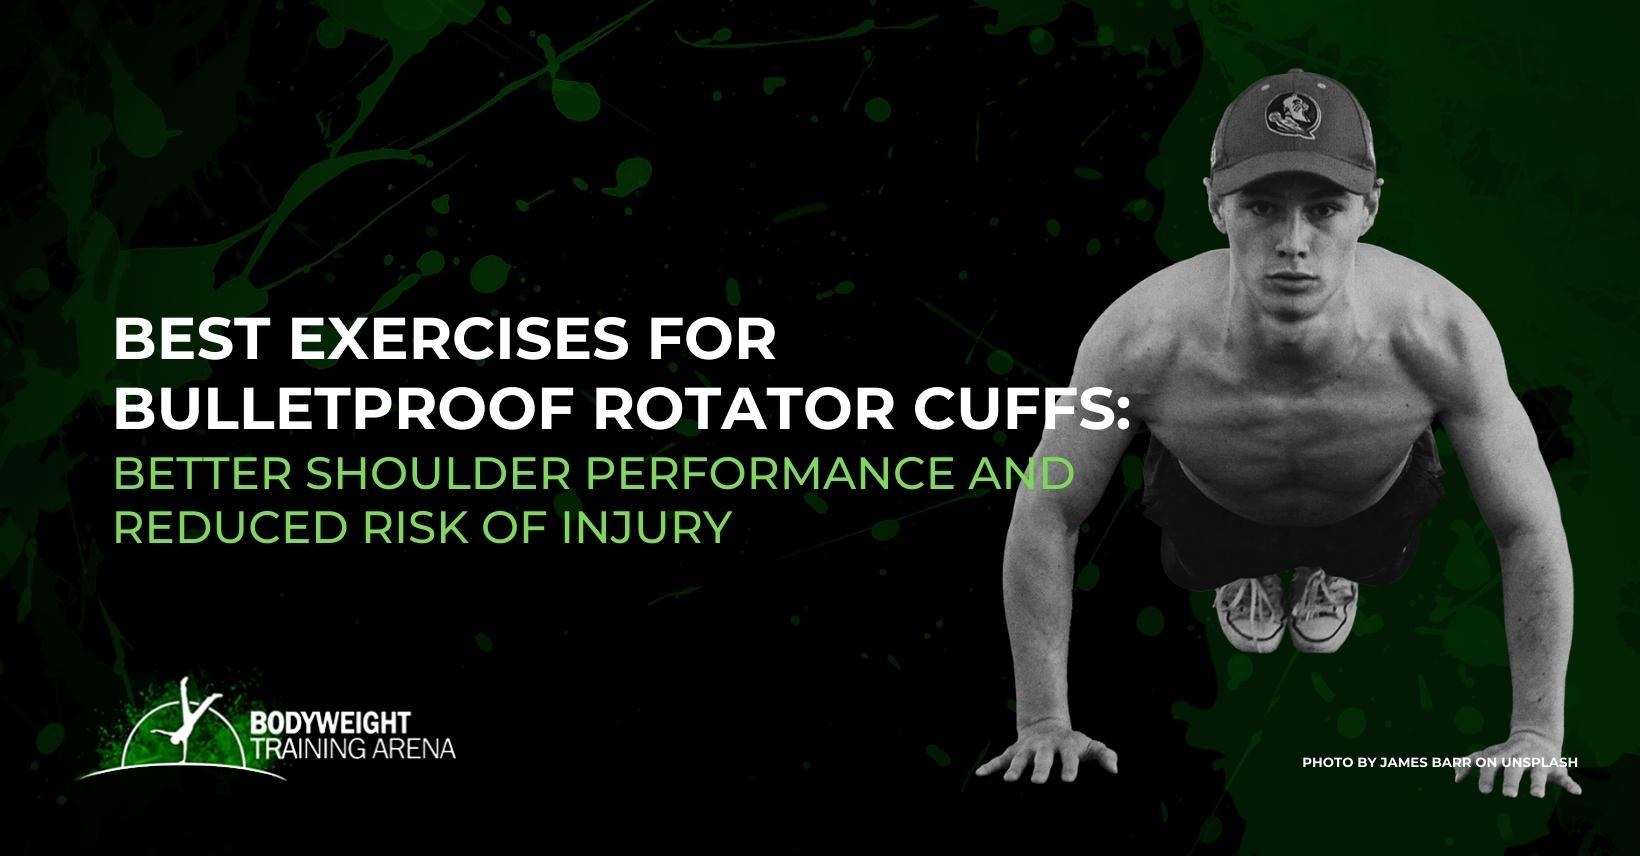 Best Exercises for Bulletproof Rotator Cuffs